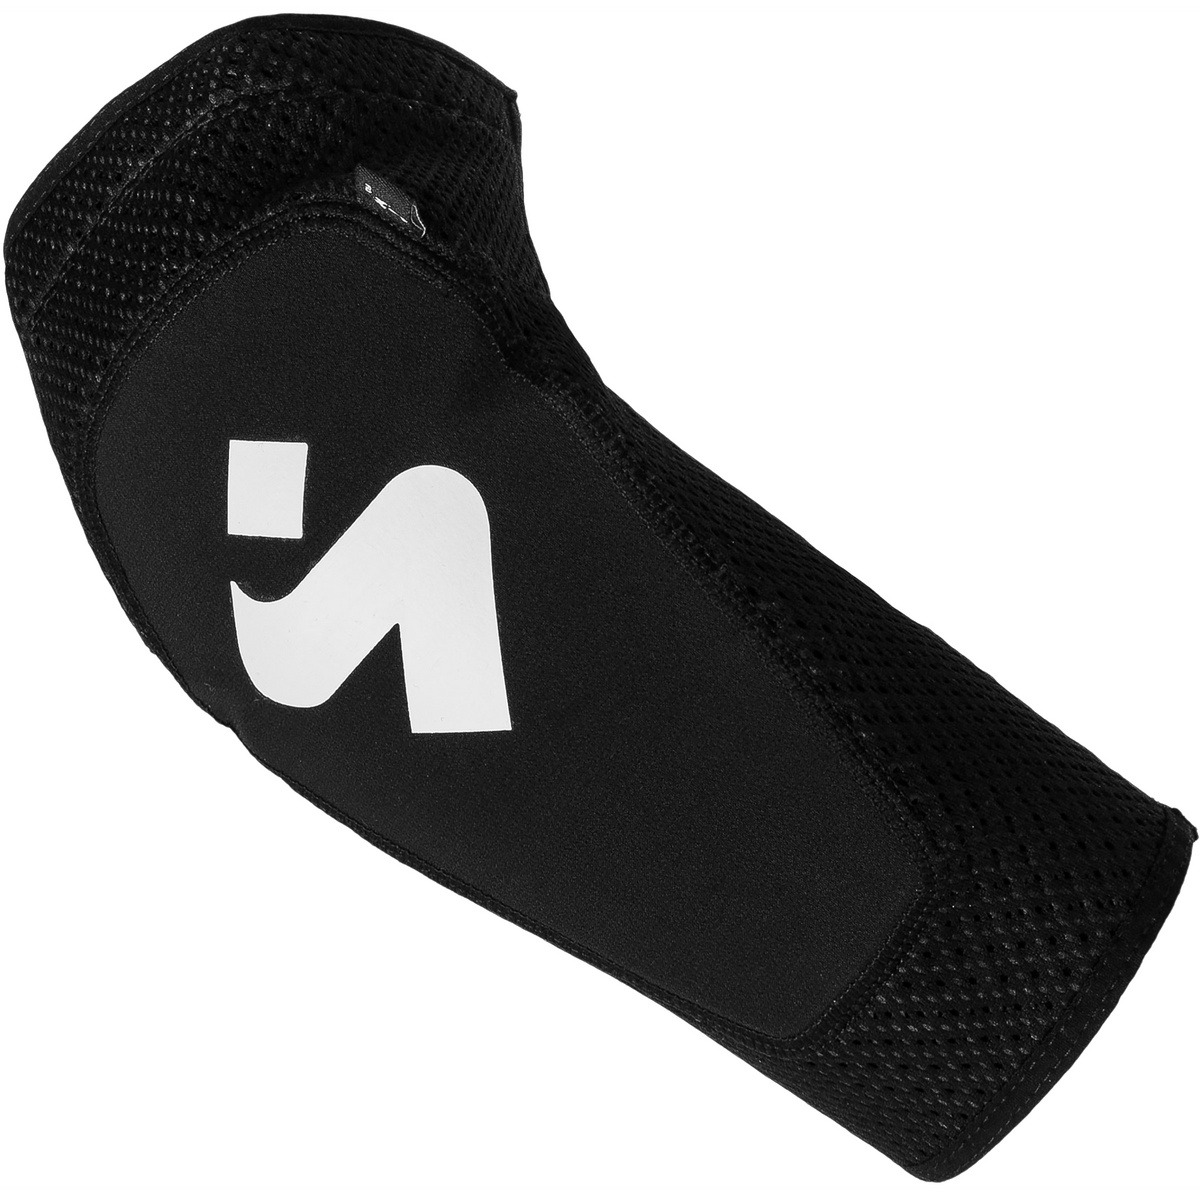 Image of Sweet Protection Gomitiere Elbow Guards Light